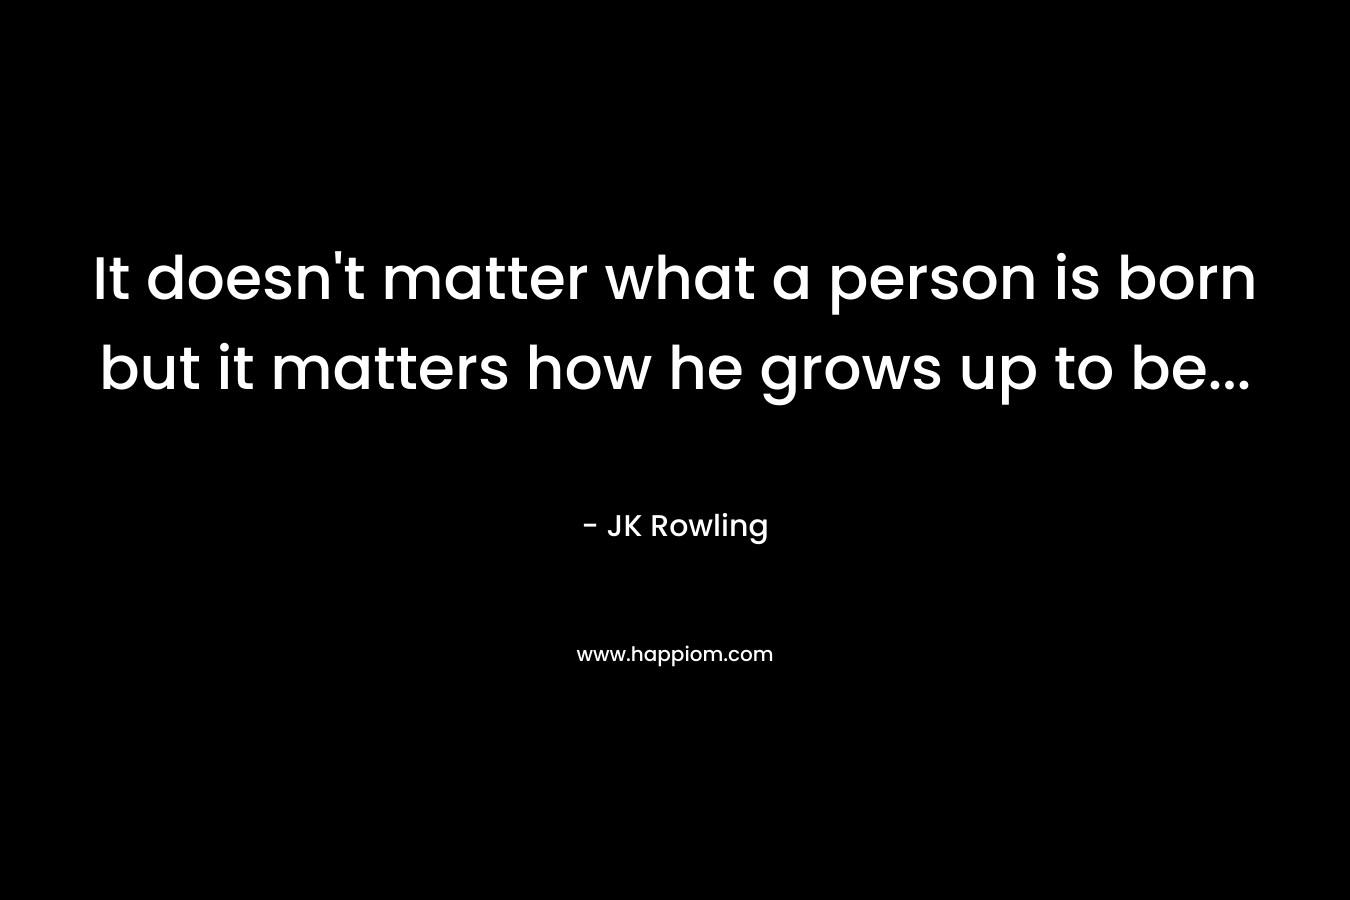 It doesn't matter what a person is born but it matters how he grows up to be...